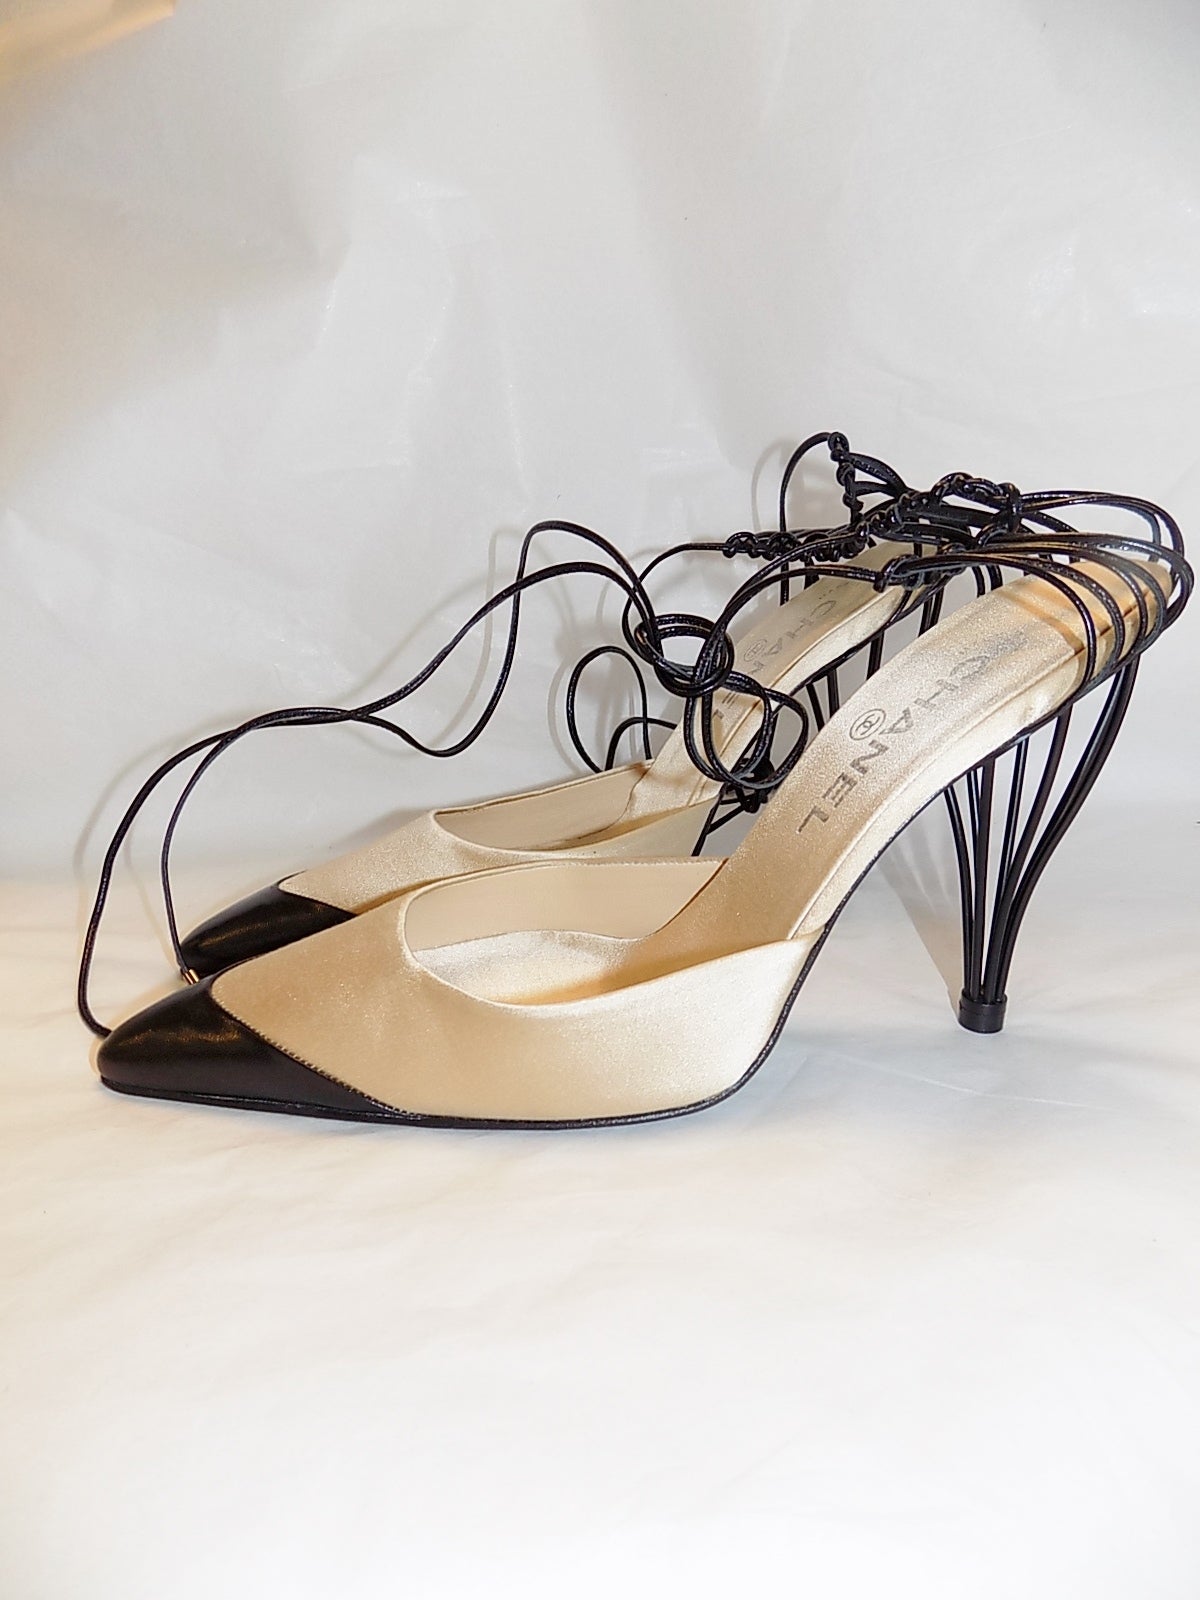 Chanel Wire Heel Shoes NEW  Sz 39.5 1